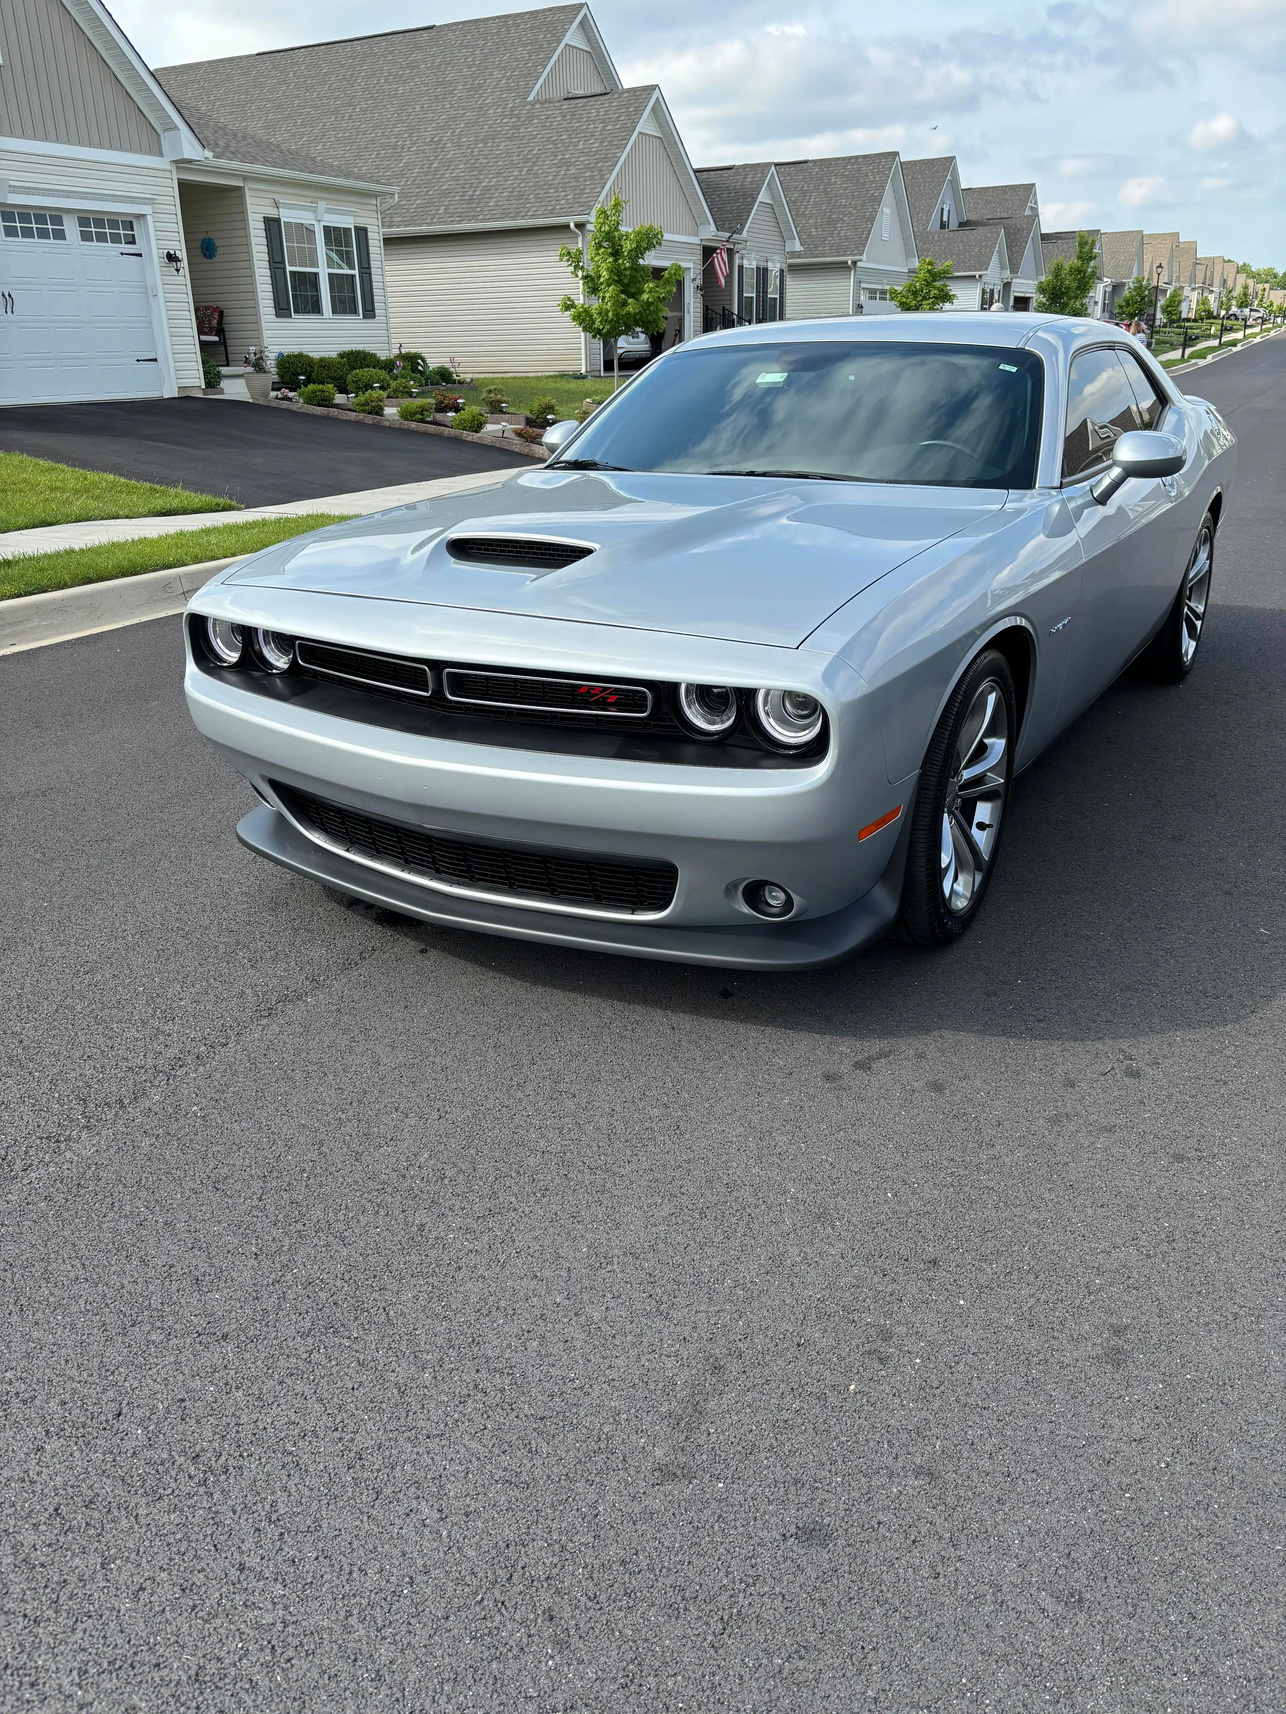 This Dodge Challenger received a basic exterior and interior detail.